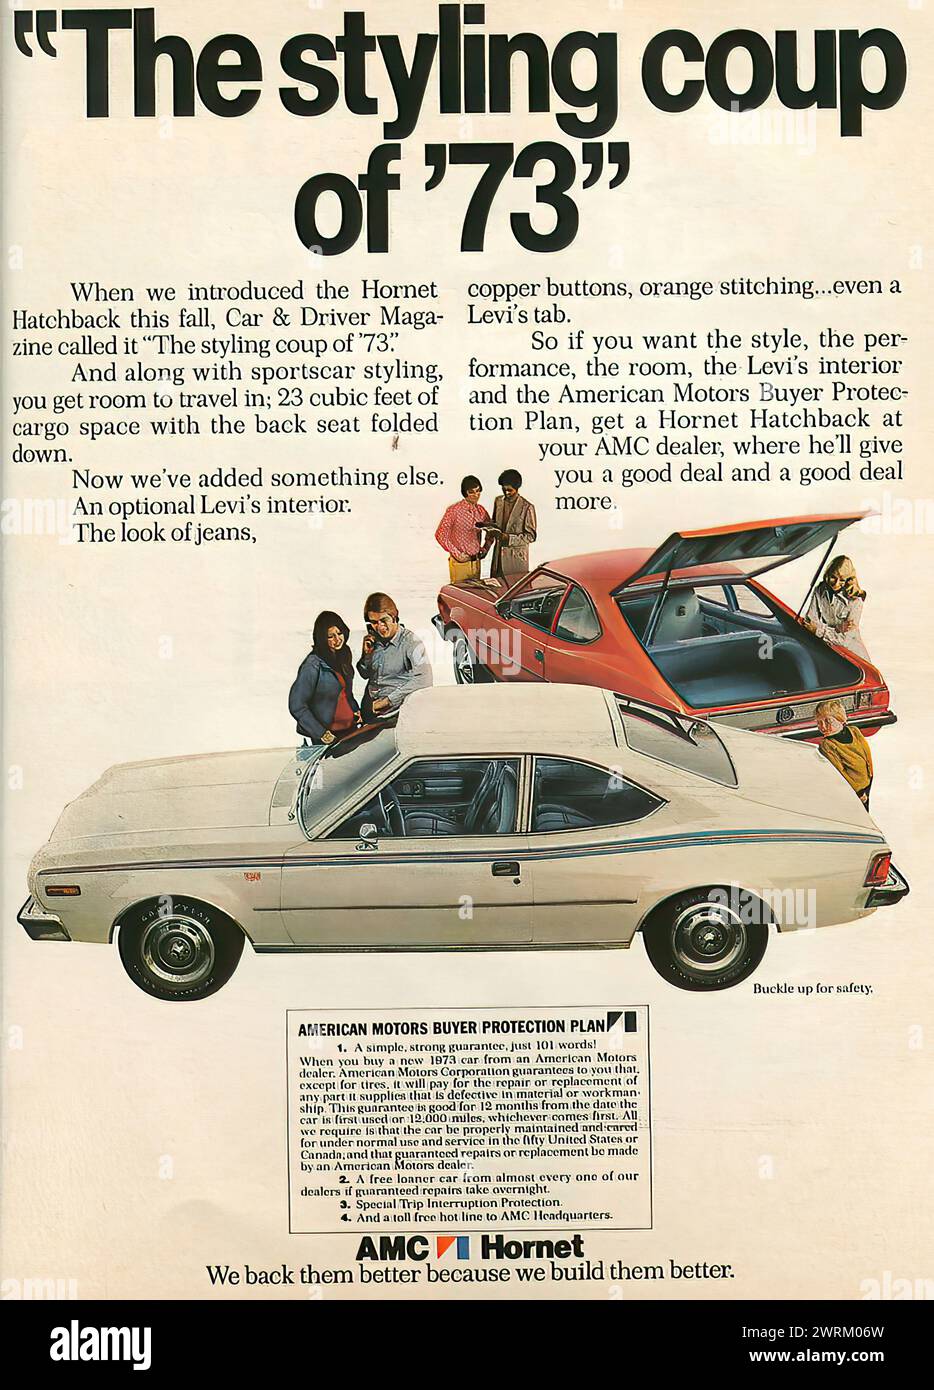 AMC Hornet - 1973 - Vintage American magazine car advert from the 70s Stock Photo